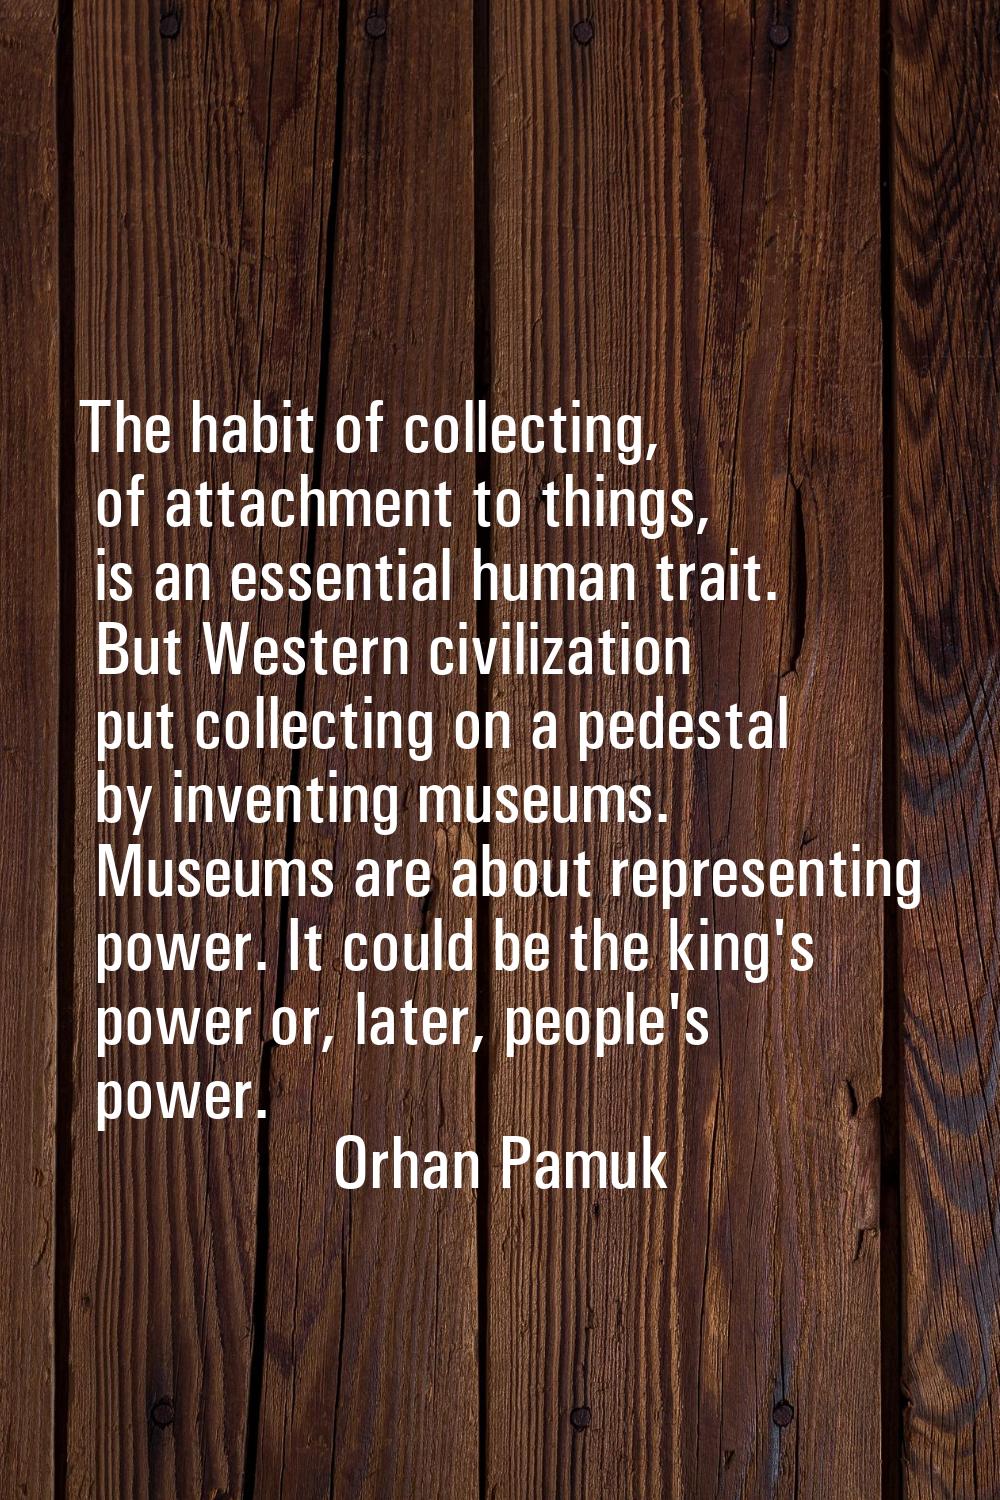 The habit of collecting, of attachment to things, is an essential human trait. But Western civiliza